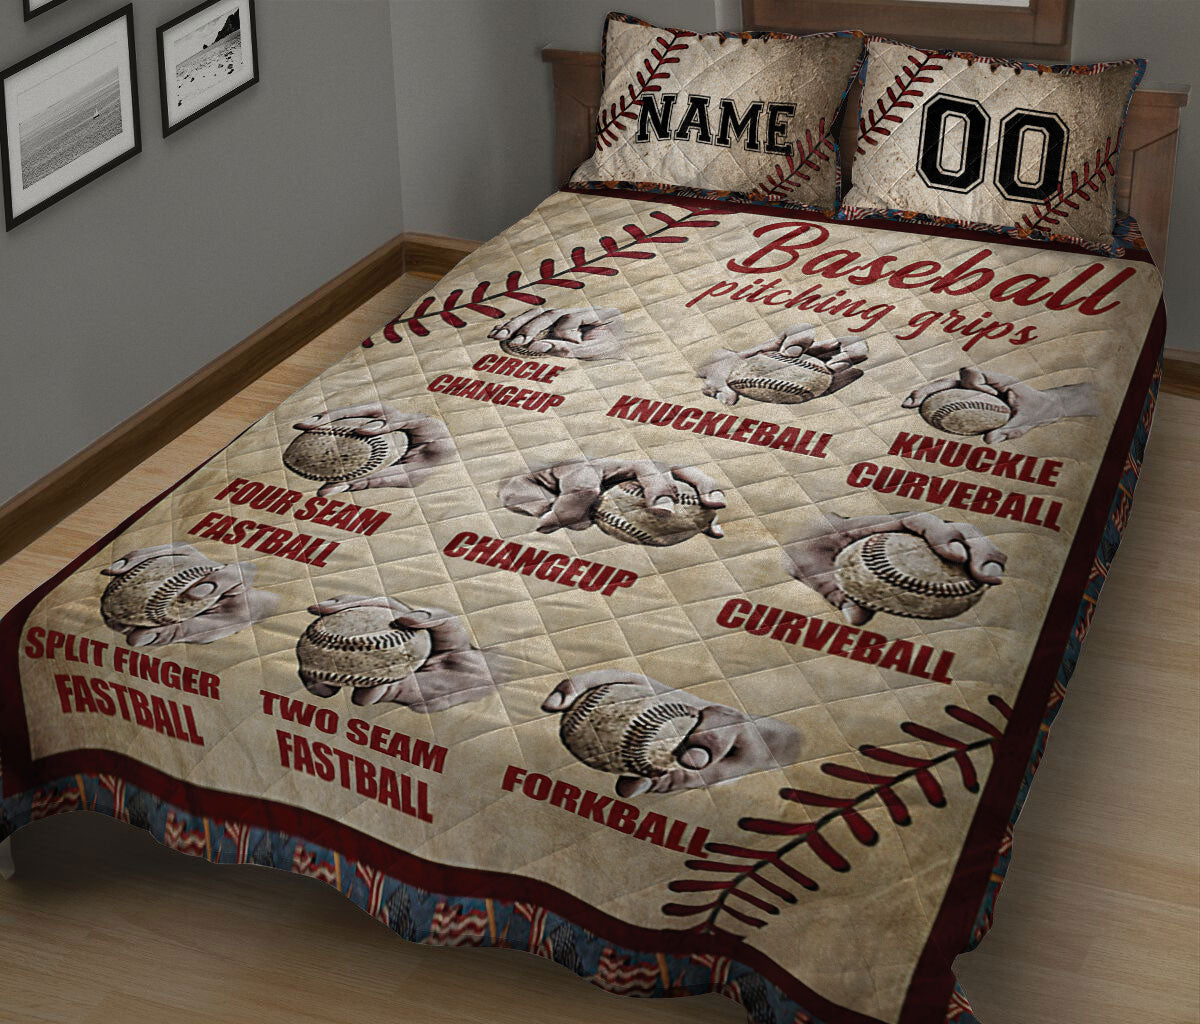 Ohaprints-Quilt-Bed-Set-Pillowcase-Baseball-Pitching-Grip-Baseball-Lover-Gift-Custom-Personalized-Name-Number-Blanket-Bedspread-Bedding-1306-King (90'' x 100'')